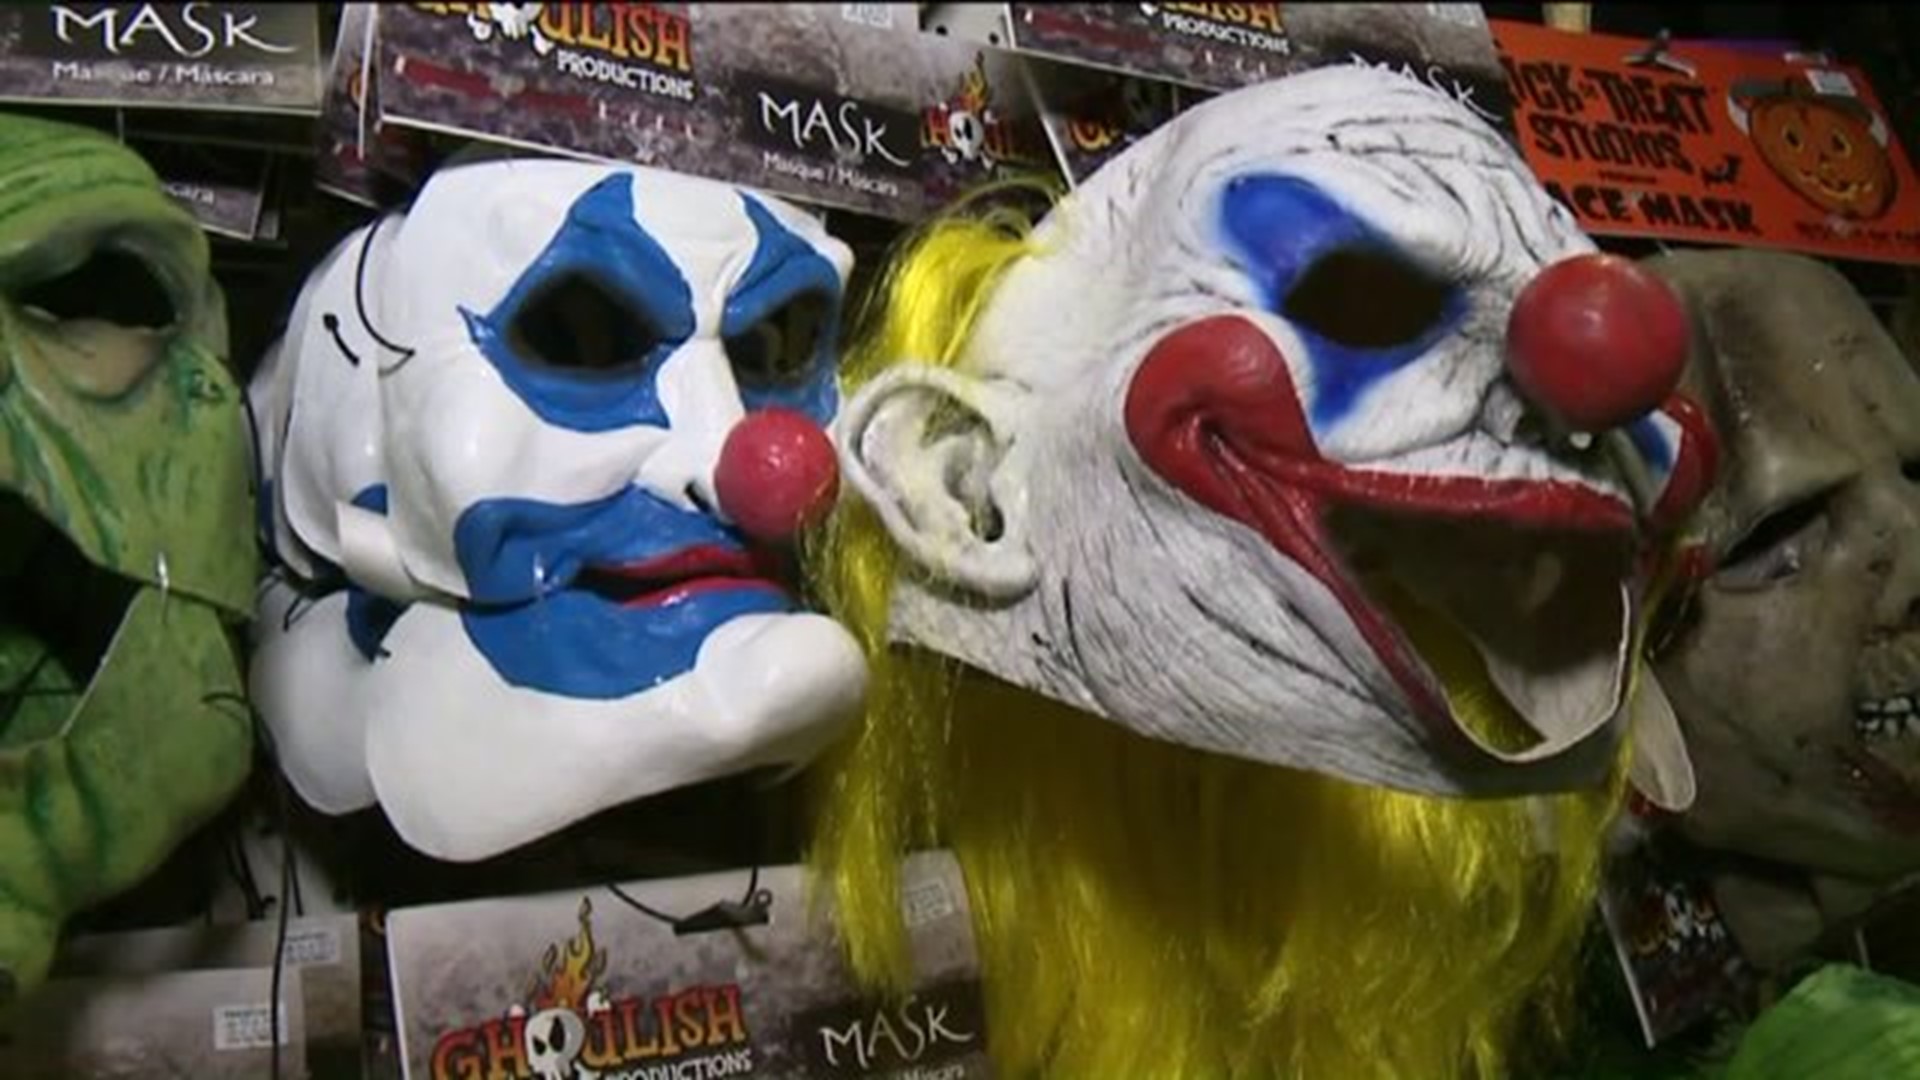 Are Creepy Clowns Hurting the Clown Business?